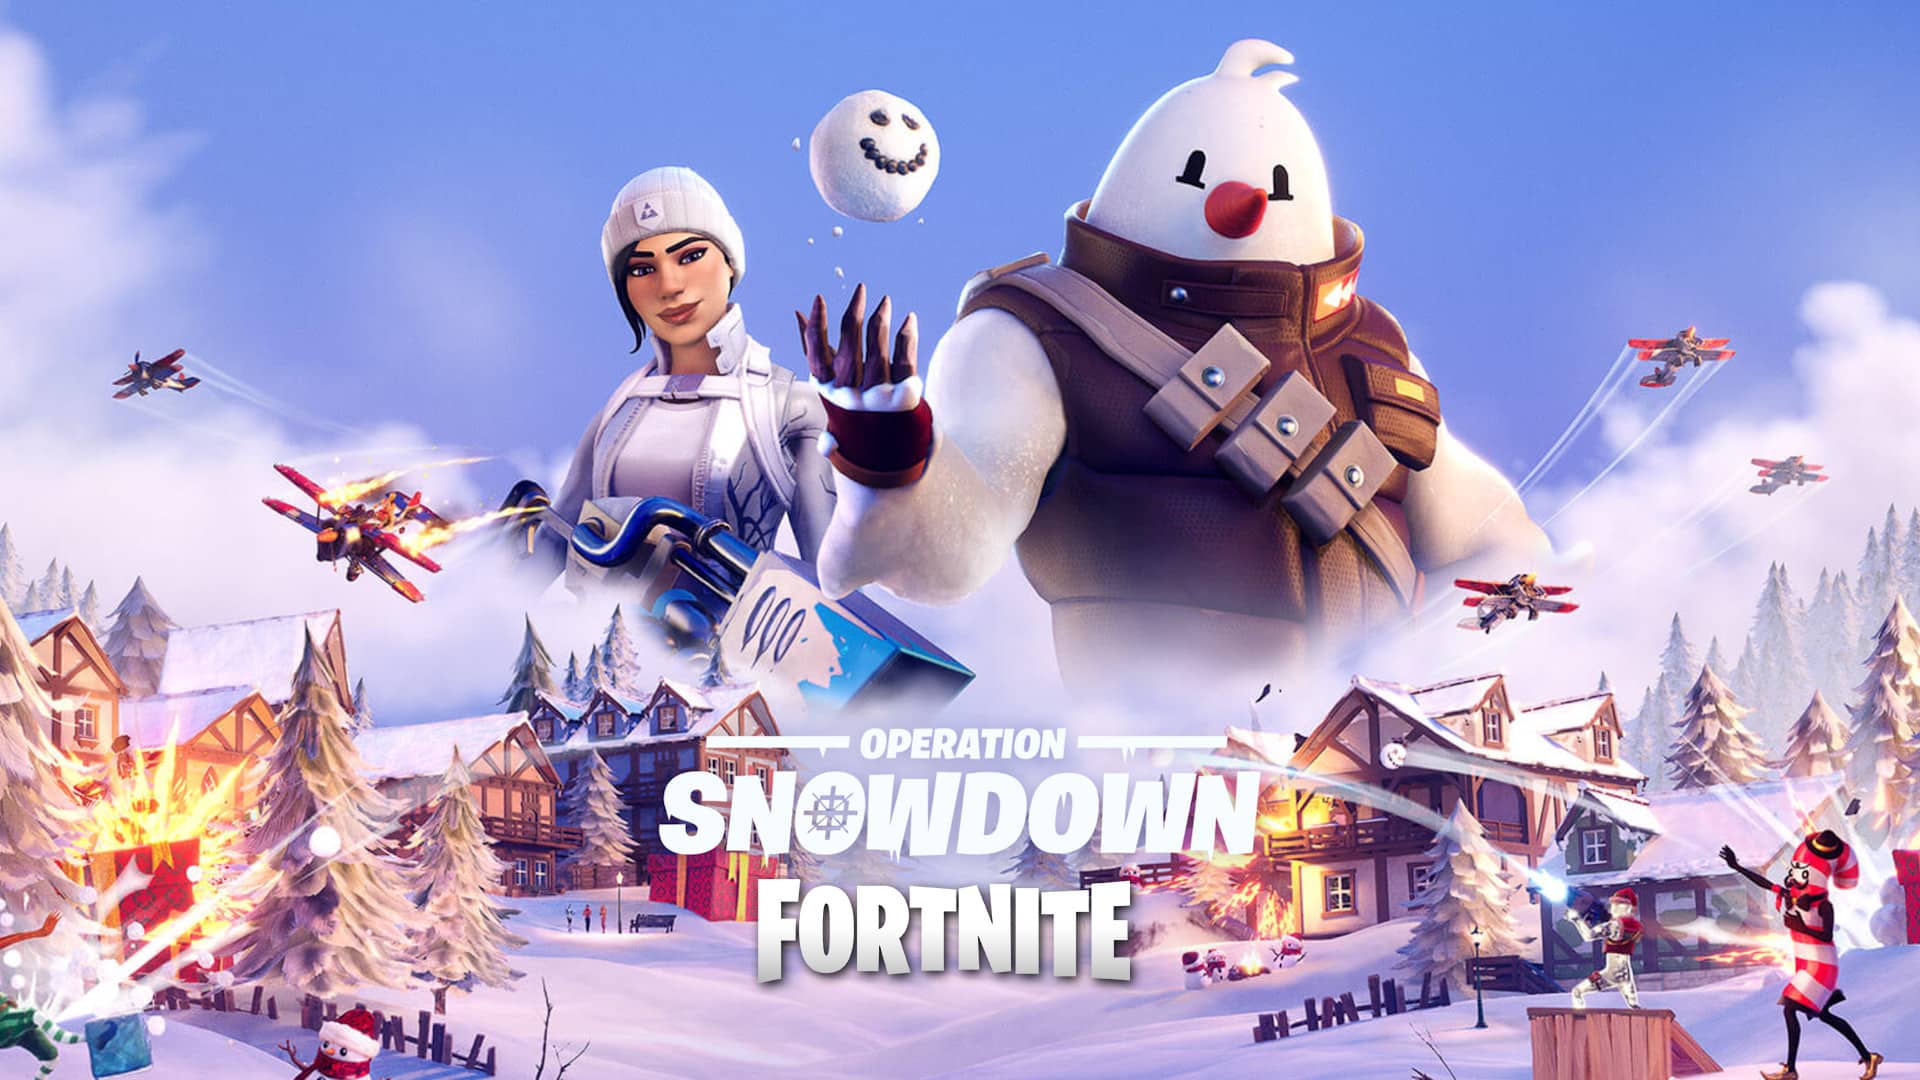 Fortnite Operation Snowdown Challenges Guide